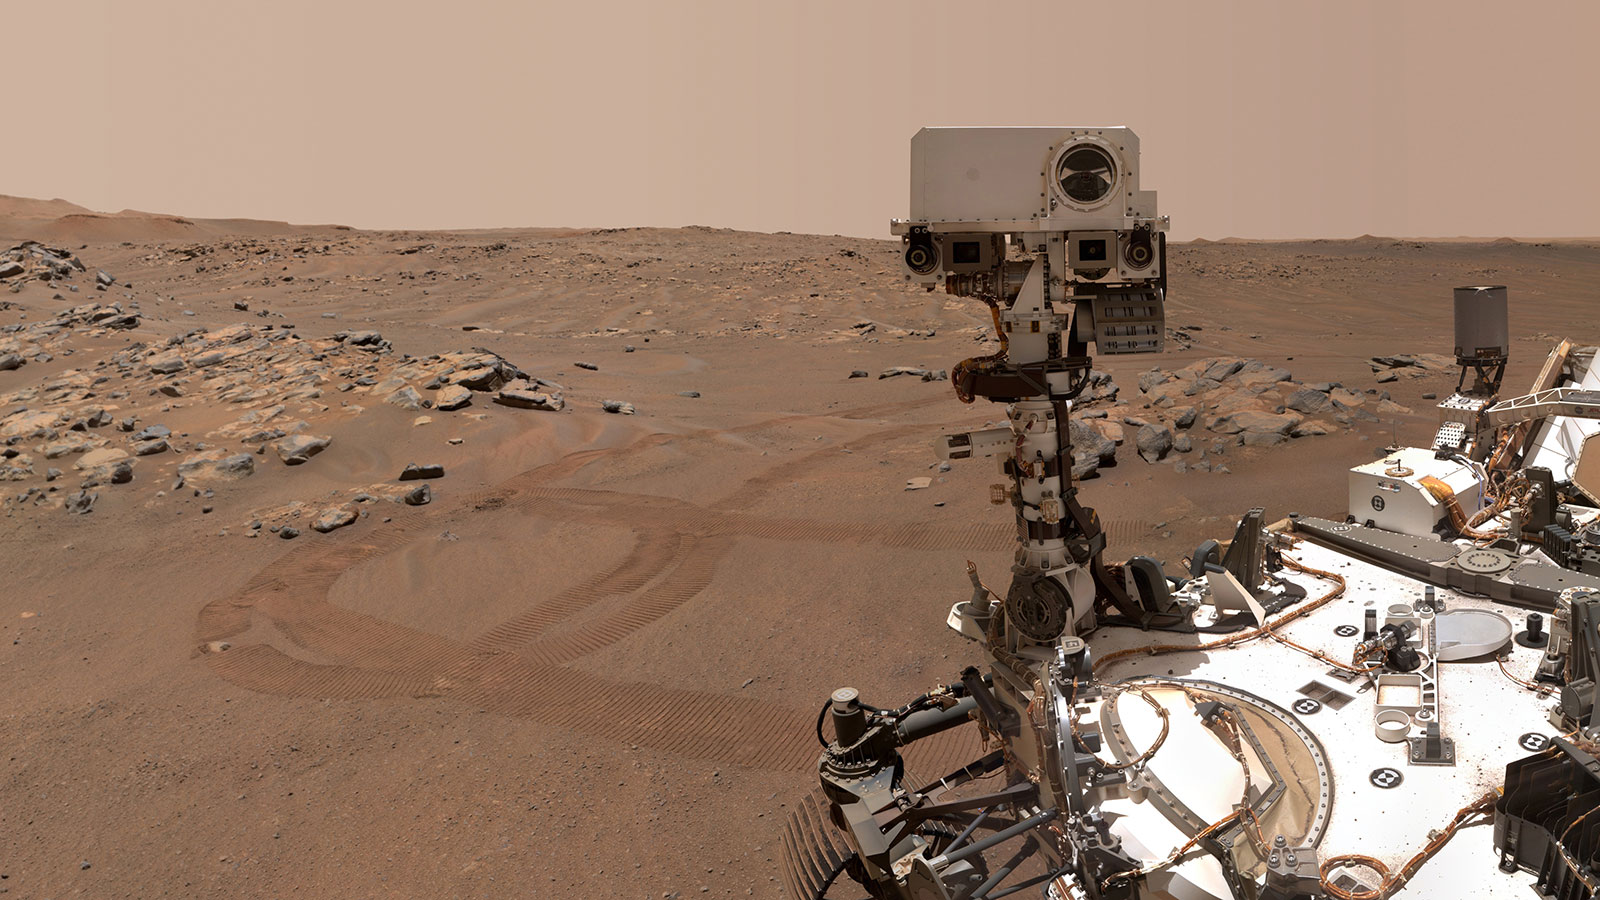 On day 198 of the mission, NASA's Perseverance Mars rover took this selfie.